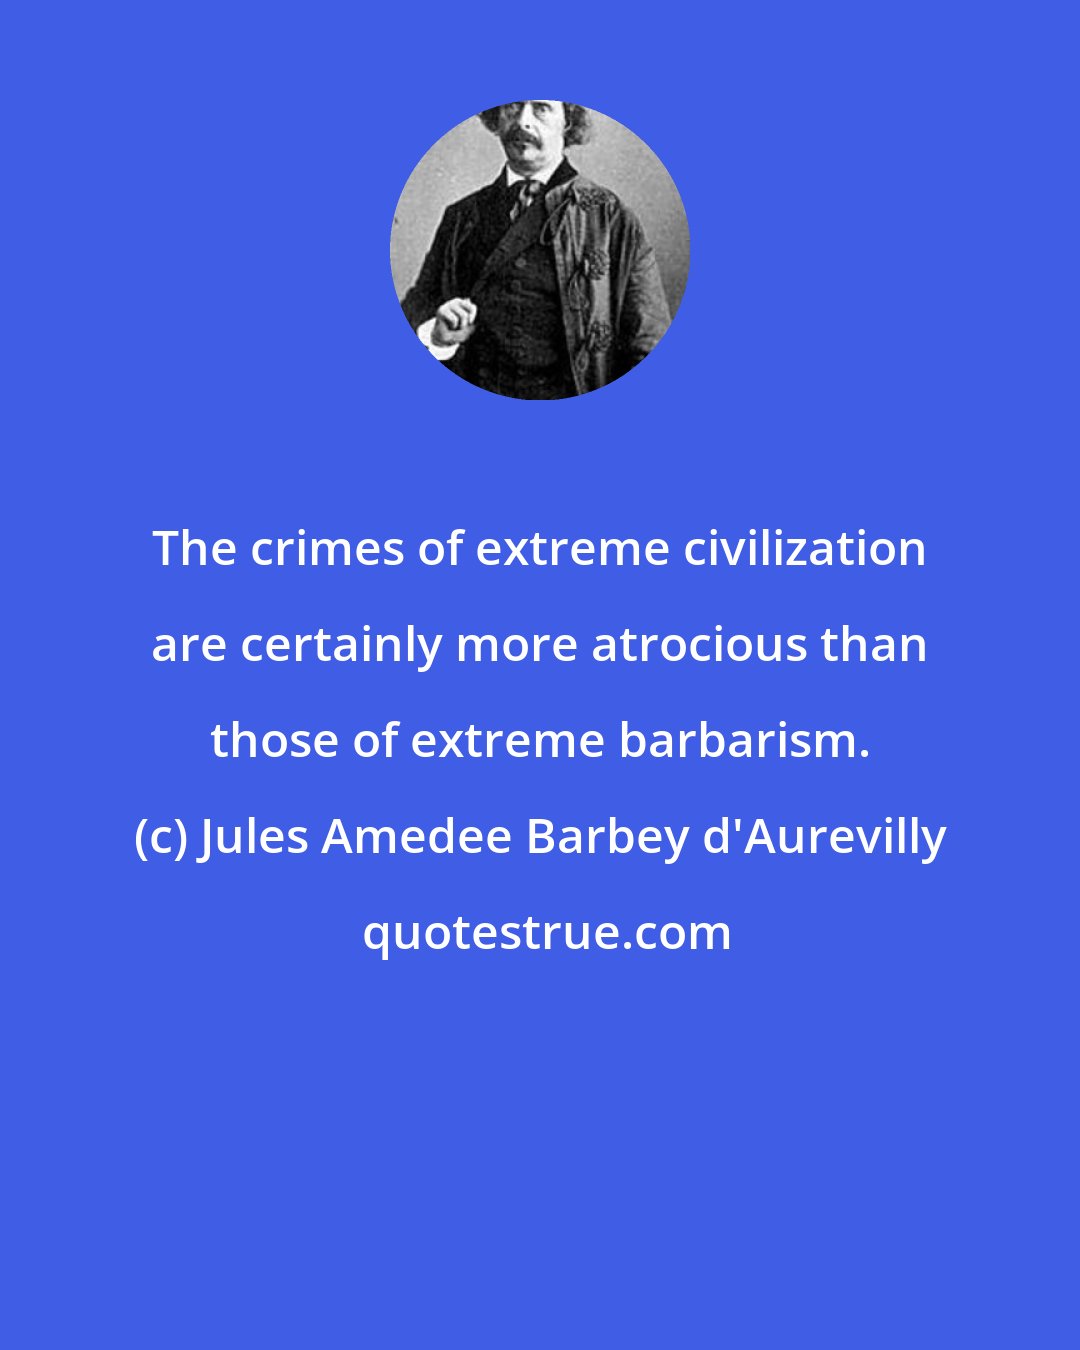 Jules Amedee Barbey d'Aurevilly: The crimes of extreme civilization are certainly more atrocious than those of extreme barbarism.